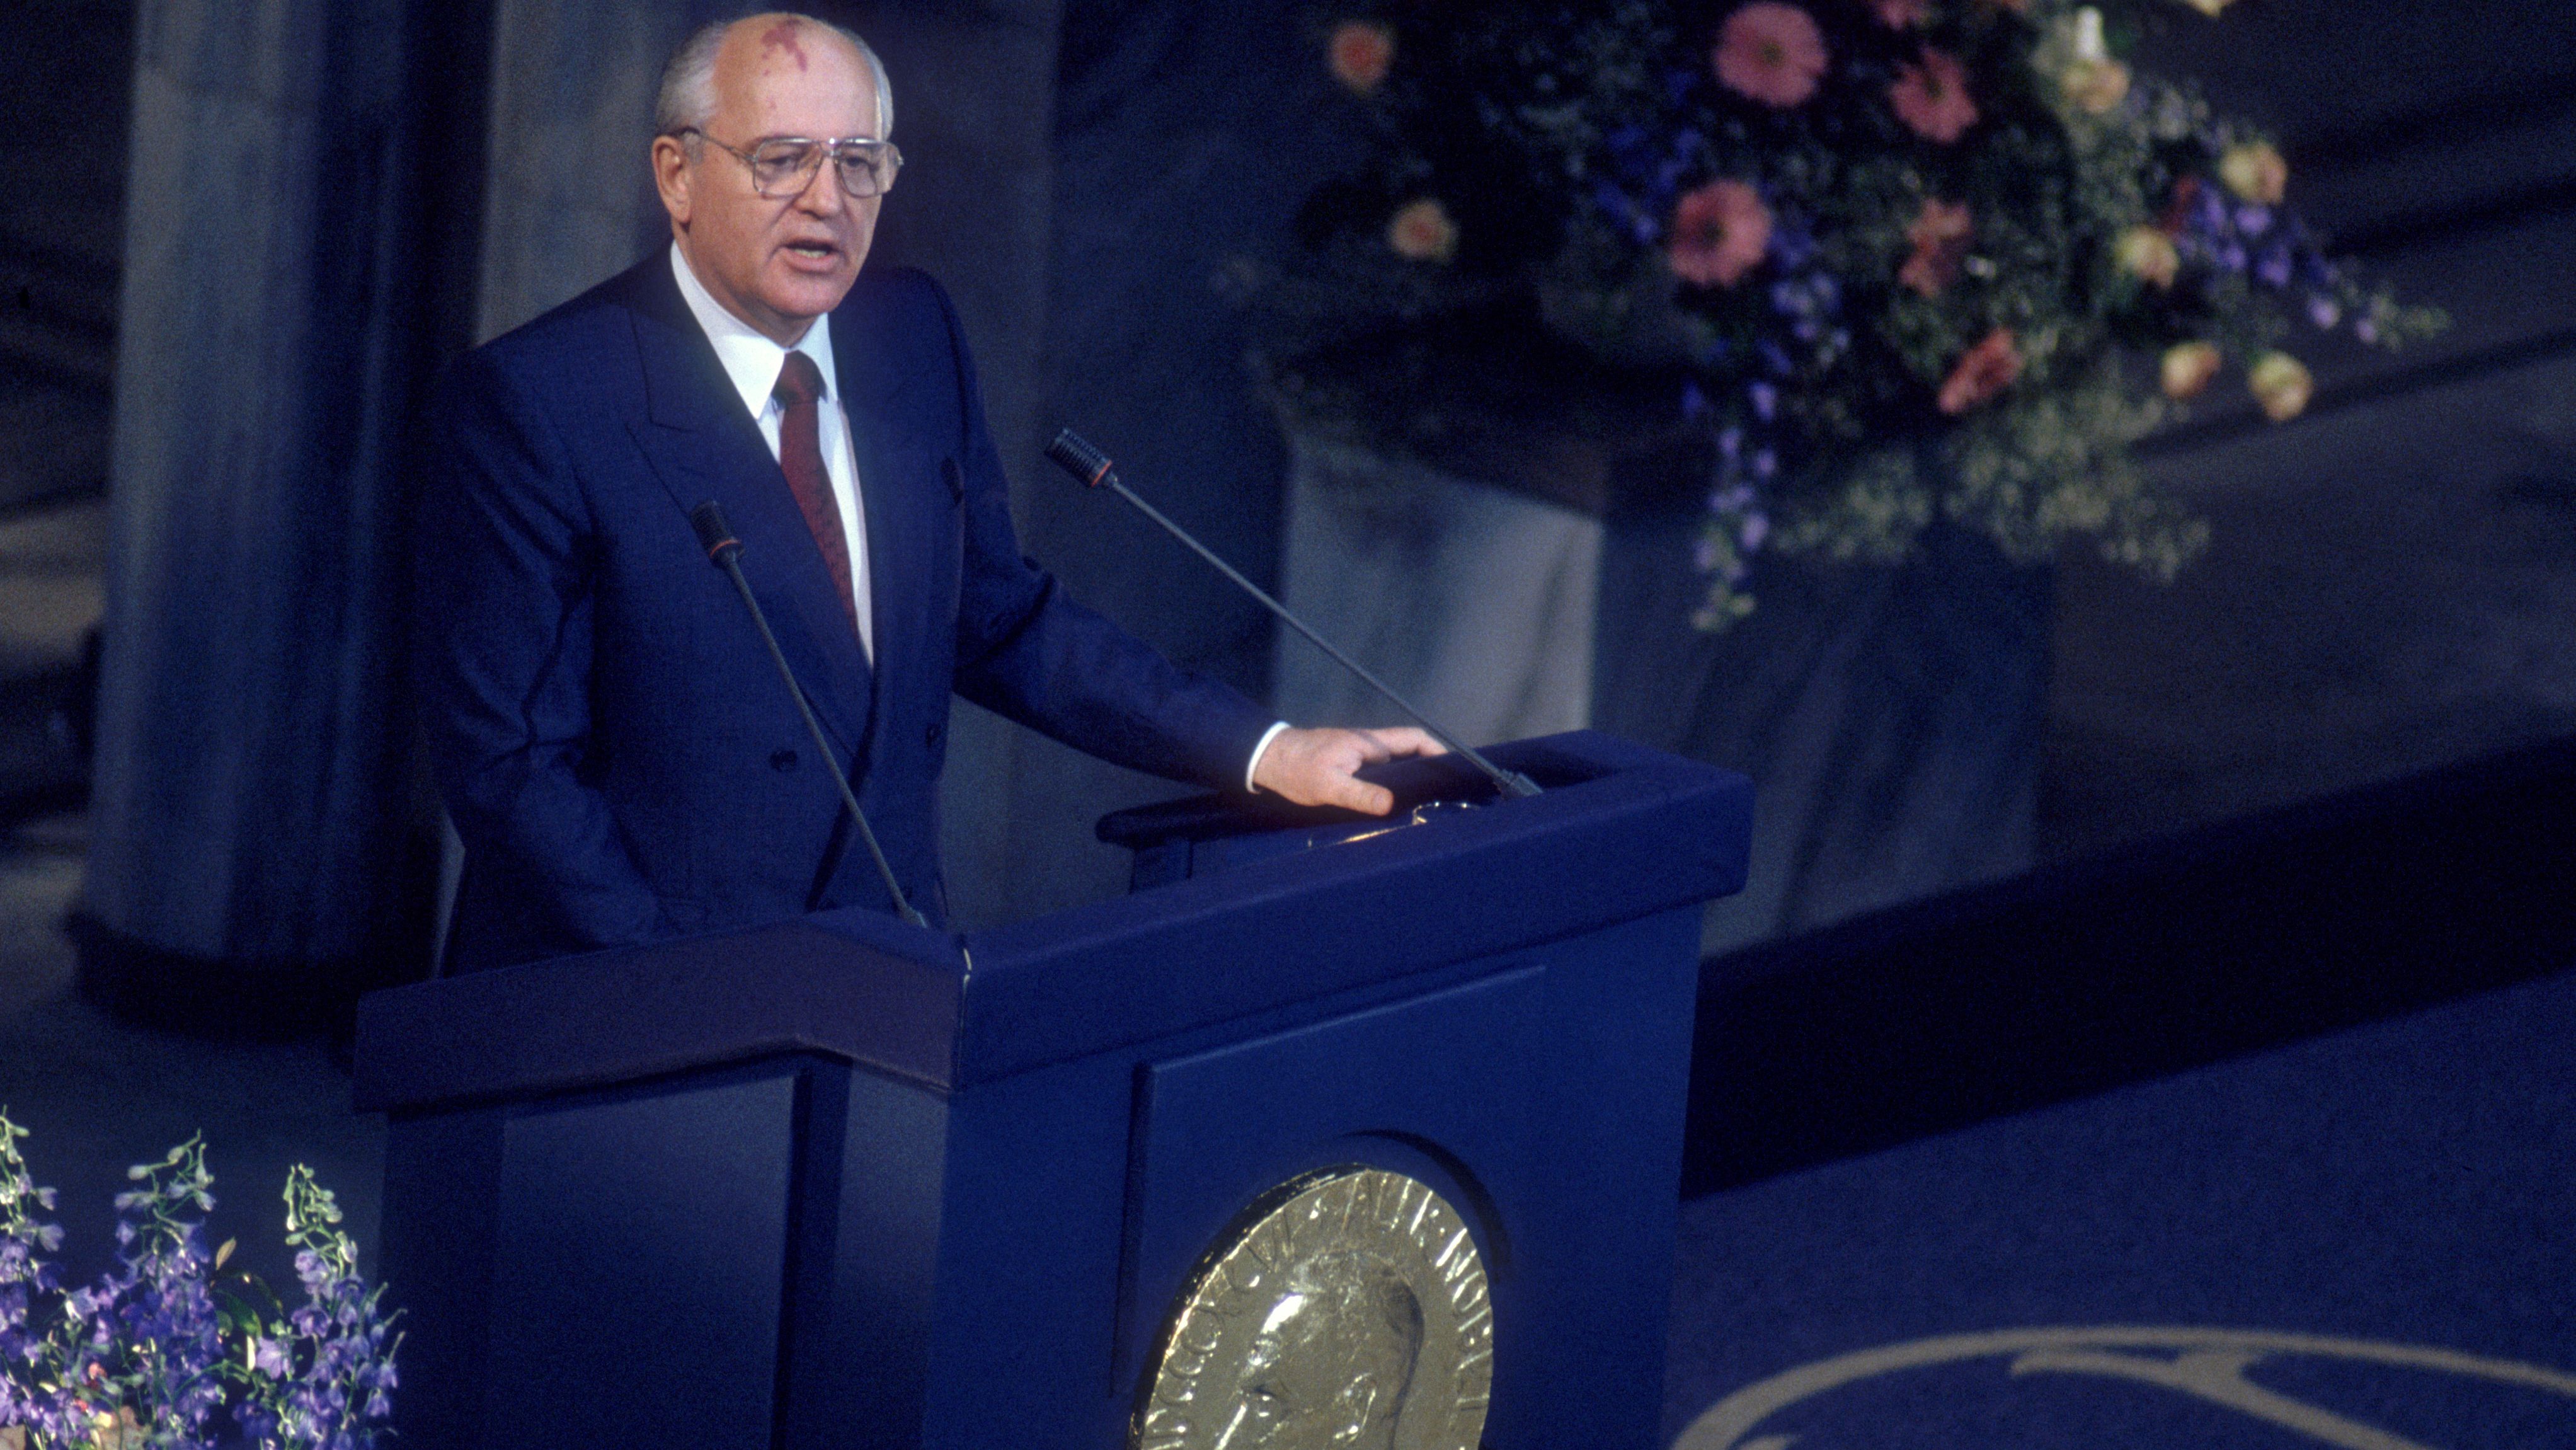 Gorbachev gives a speech after receiving the Nobel Peace Prize in June 1991. He was awarded "for his leading role in the peace process which today characterizes important parts of the international community."